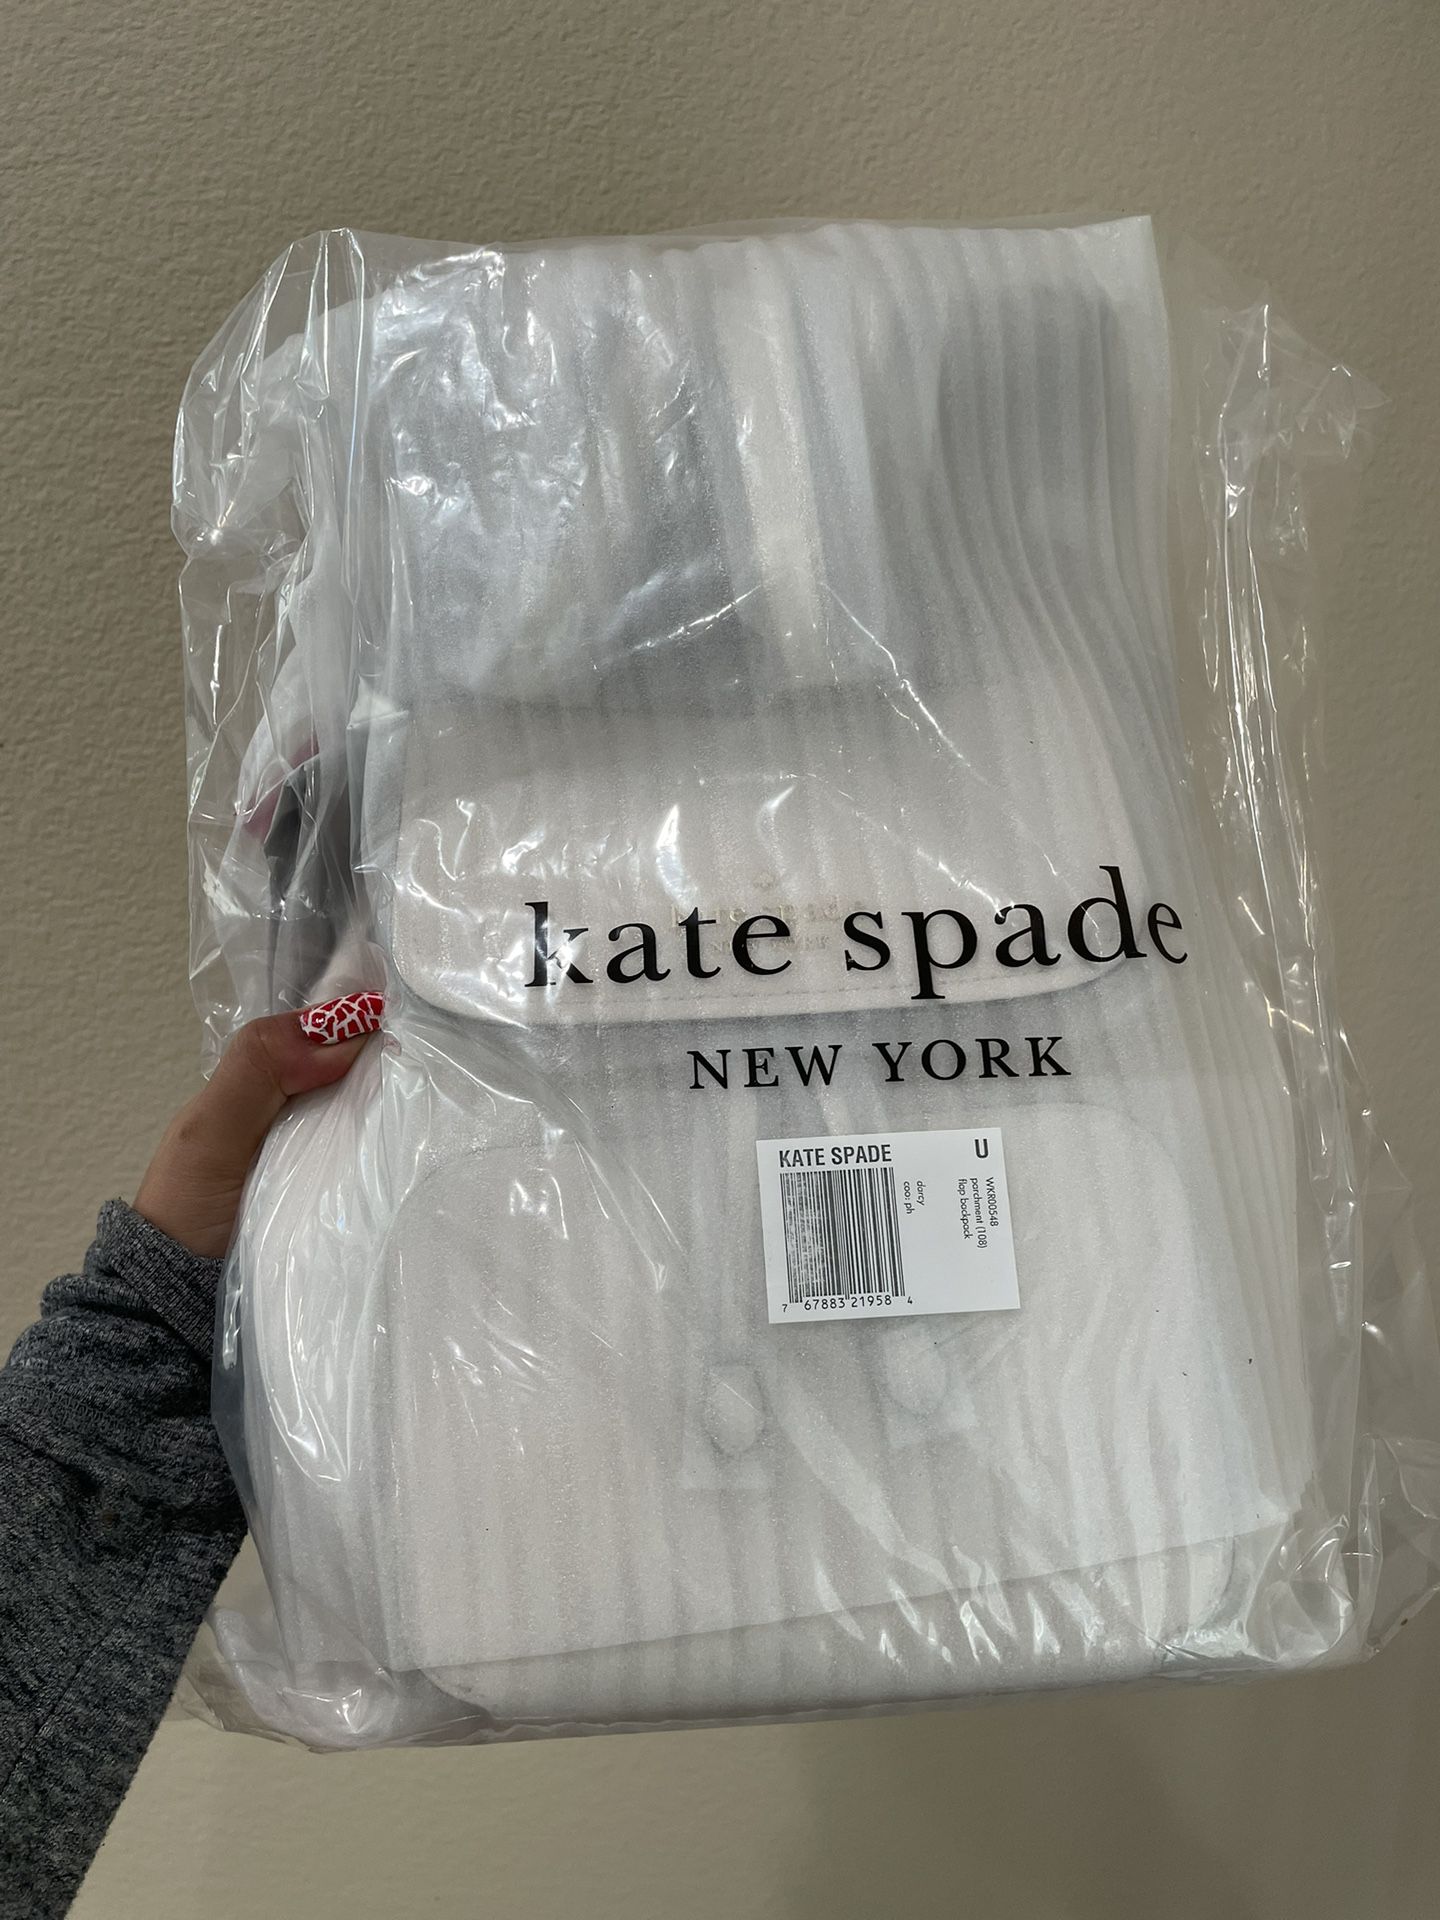 Kate Spade Darcy Flap Backpack for just $89 shipped! (Reg. $359